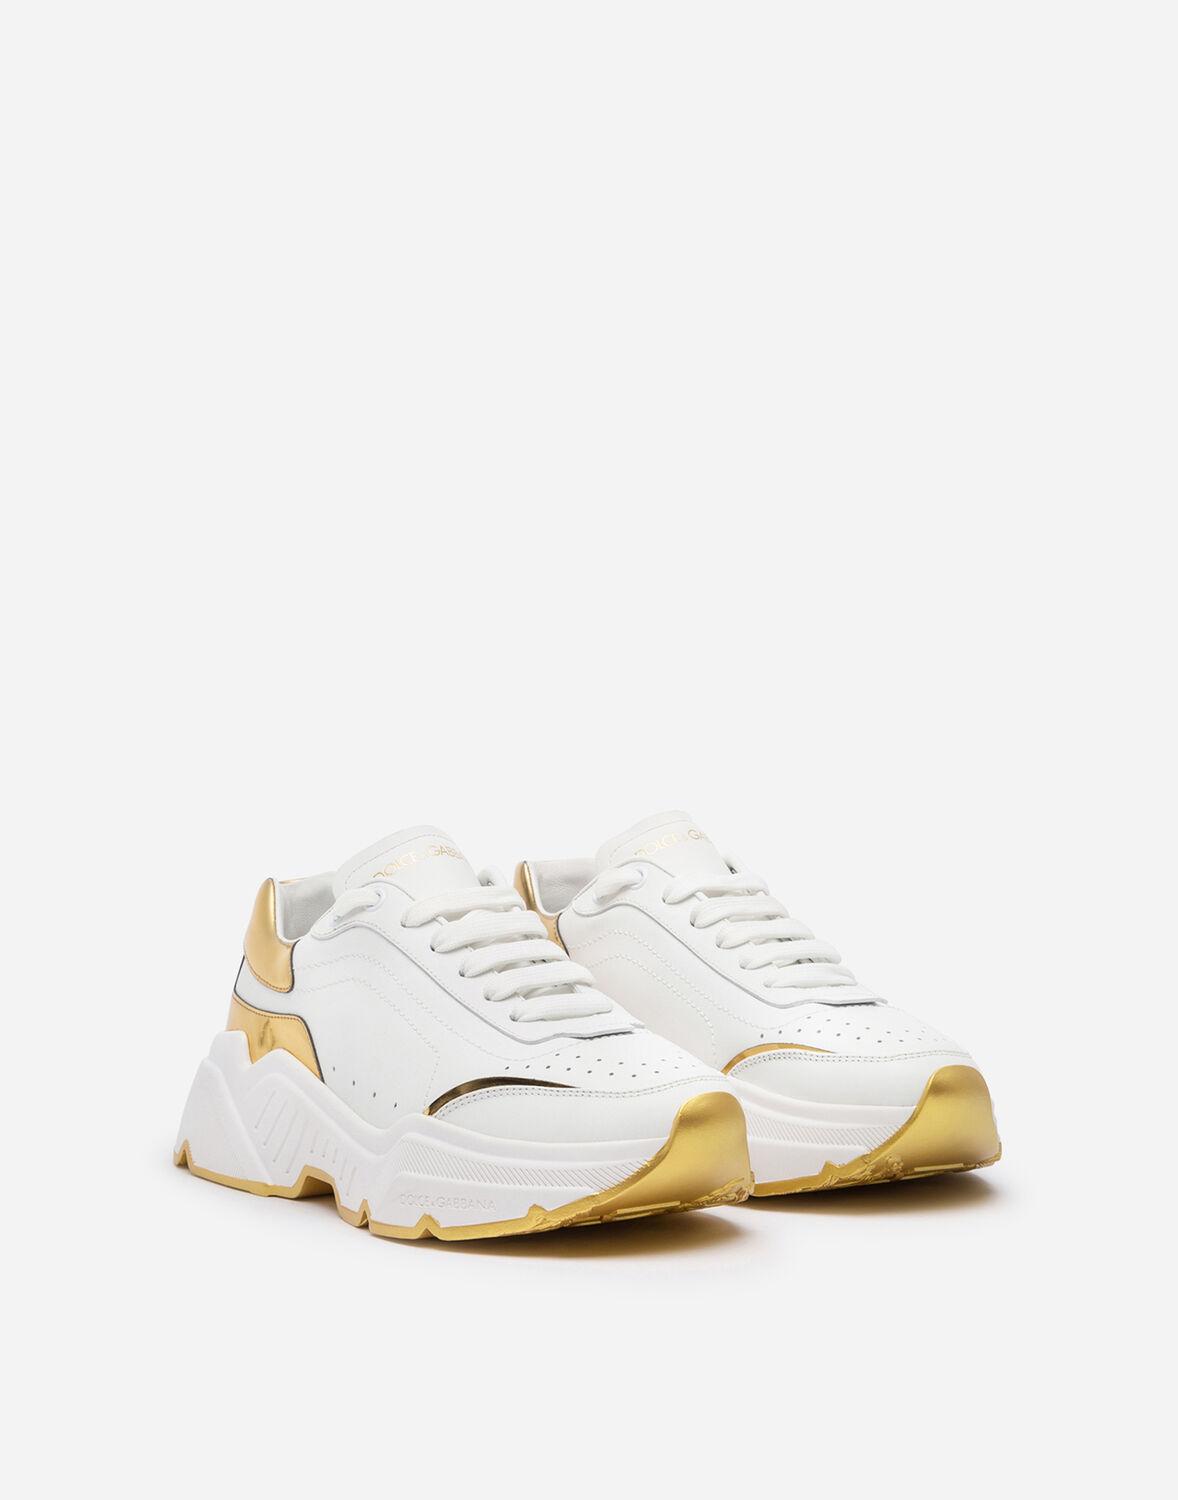 Dolce & Gabbana Nappa Leather Daymaster Sneakers in White/Gold (White ...